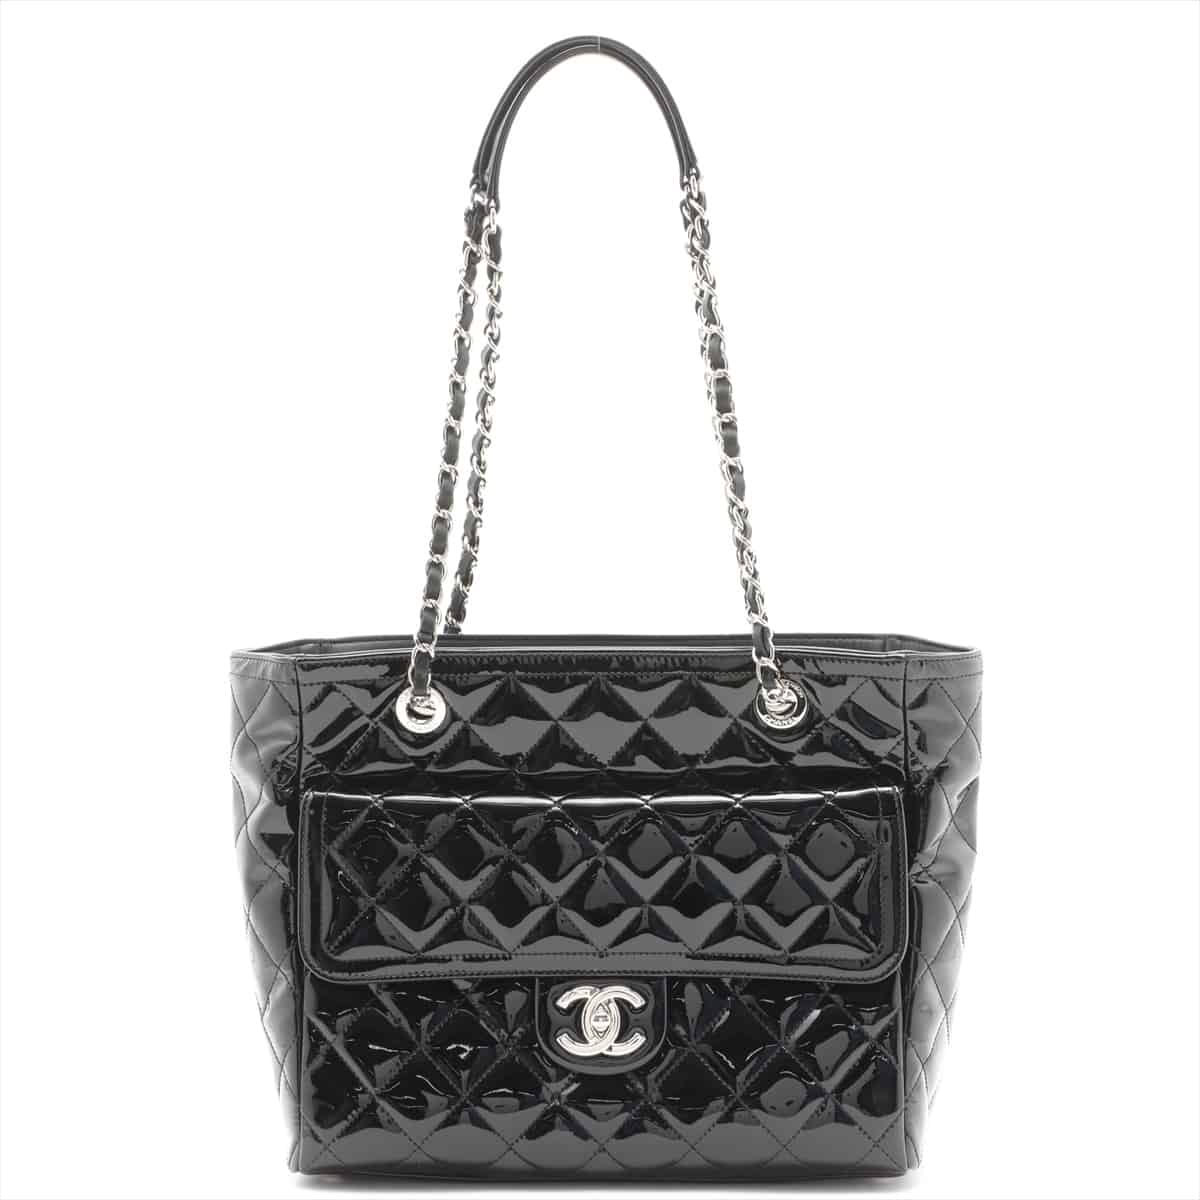 Chanel Matelasse Patent leather Chain tote bag Black Silver Metal fittings 20XXXXXX